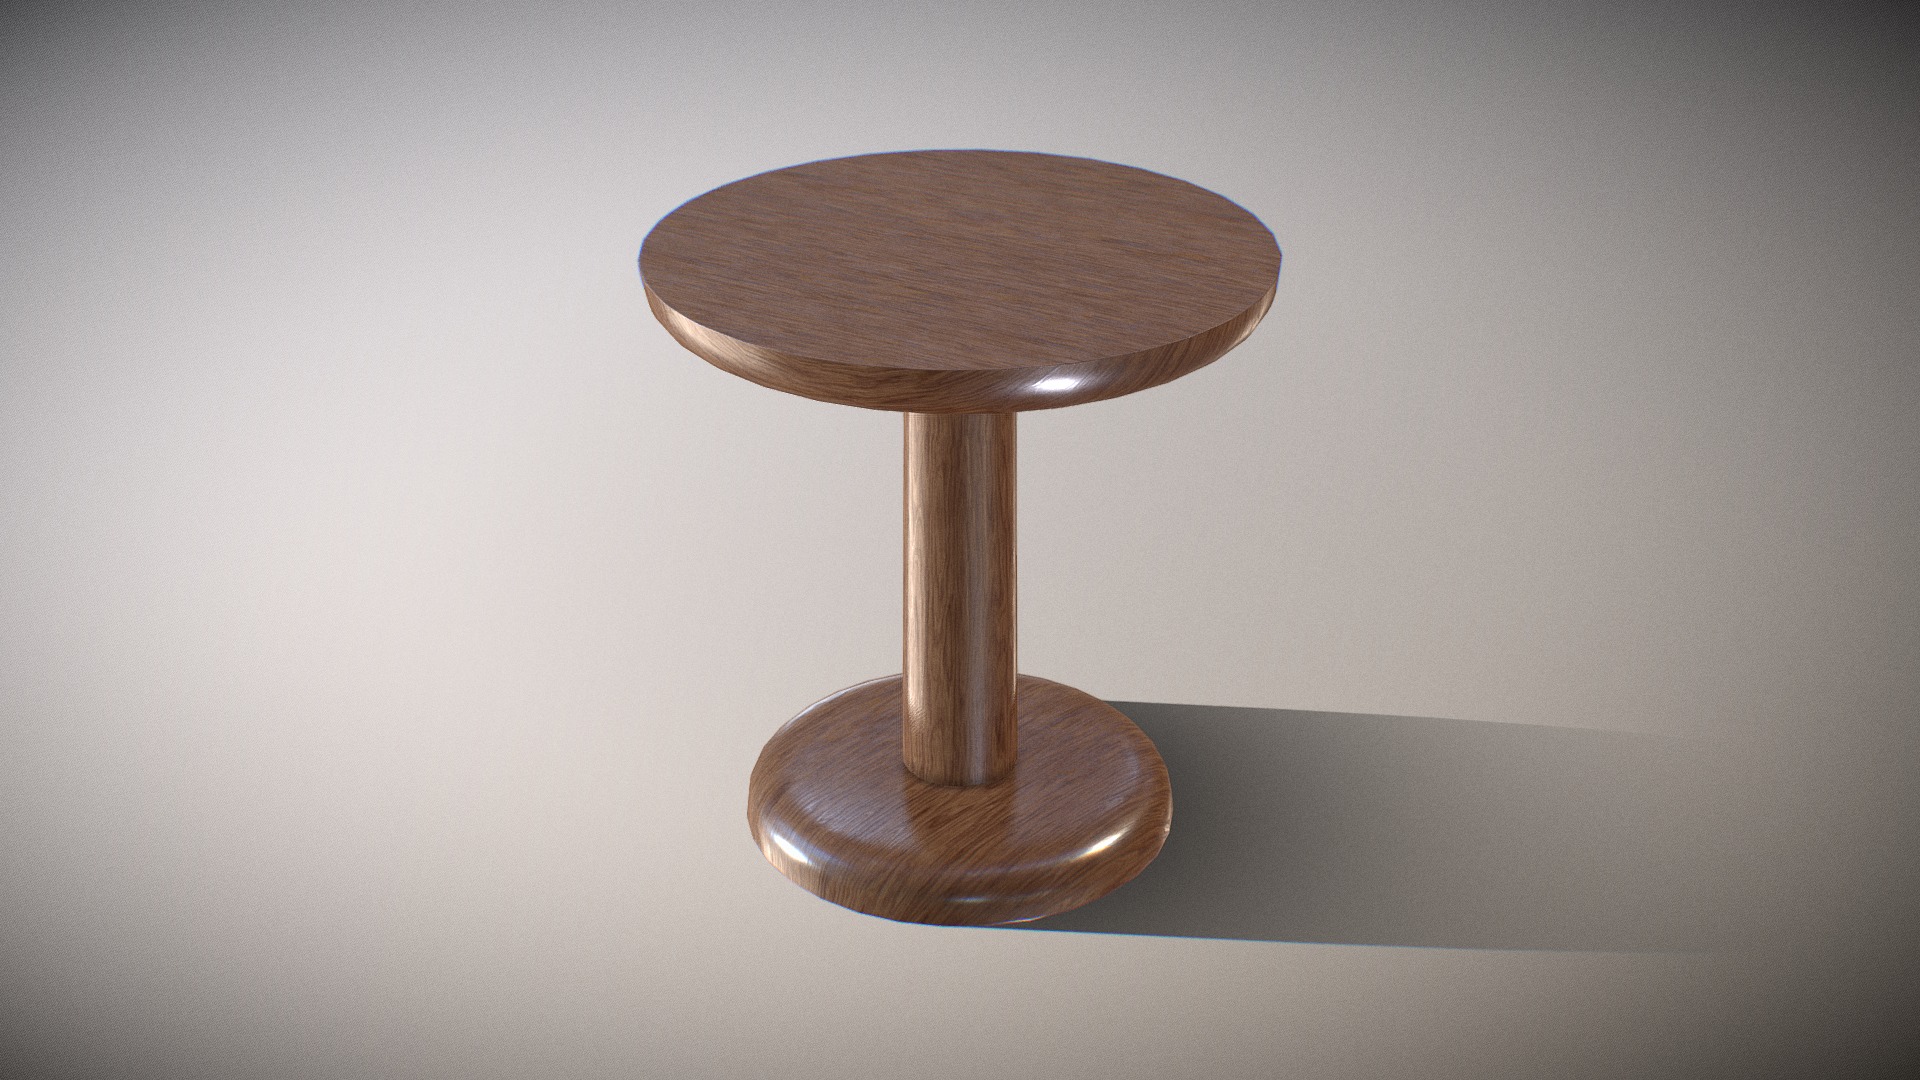 3D model PON-Table Model-1280 smoke oak - This is a 3D model of the PON-Table Model-1280 smoke oak. The 3D model is about a wooden table with a top.